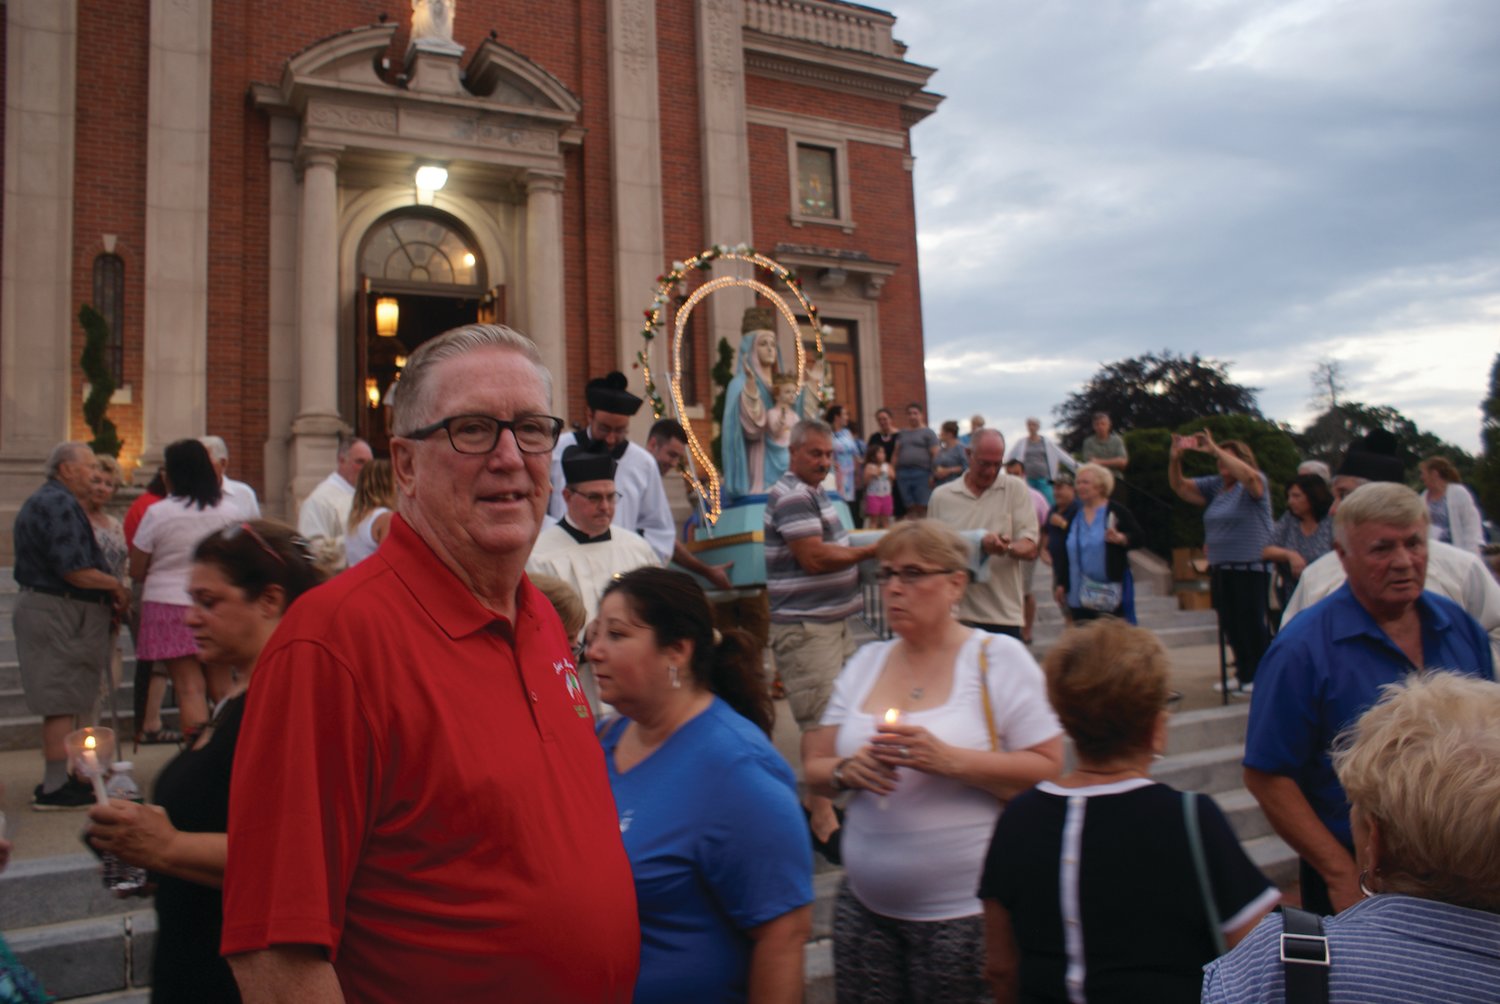 GETTING READY: Mayor Ken Hopkins waits with the crowd outside St. Mary’s Church in Knightsville for the beginning of the candlelight procession held Friday evening. 